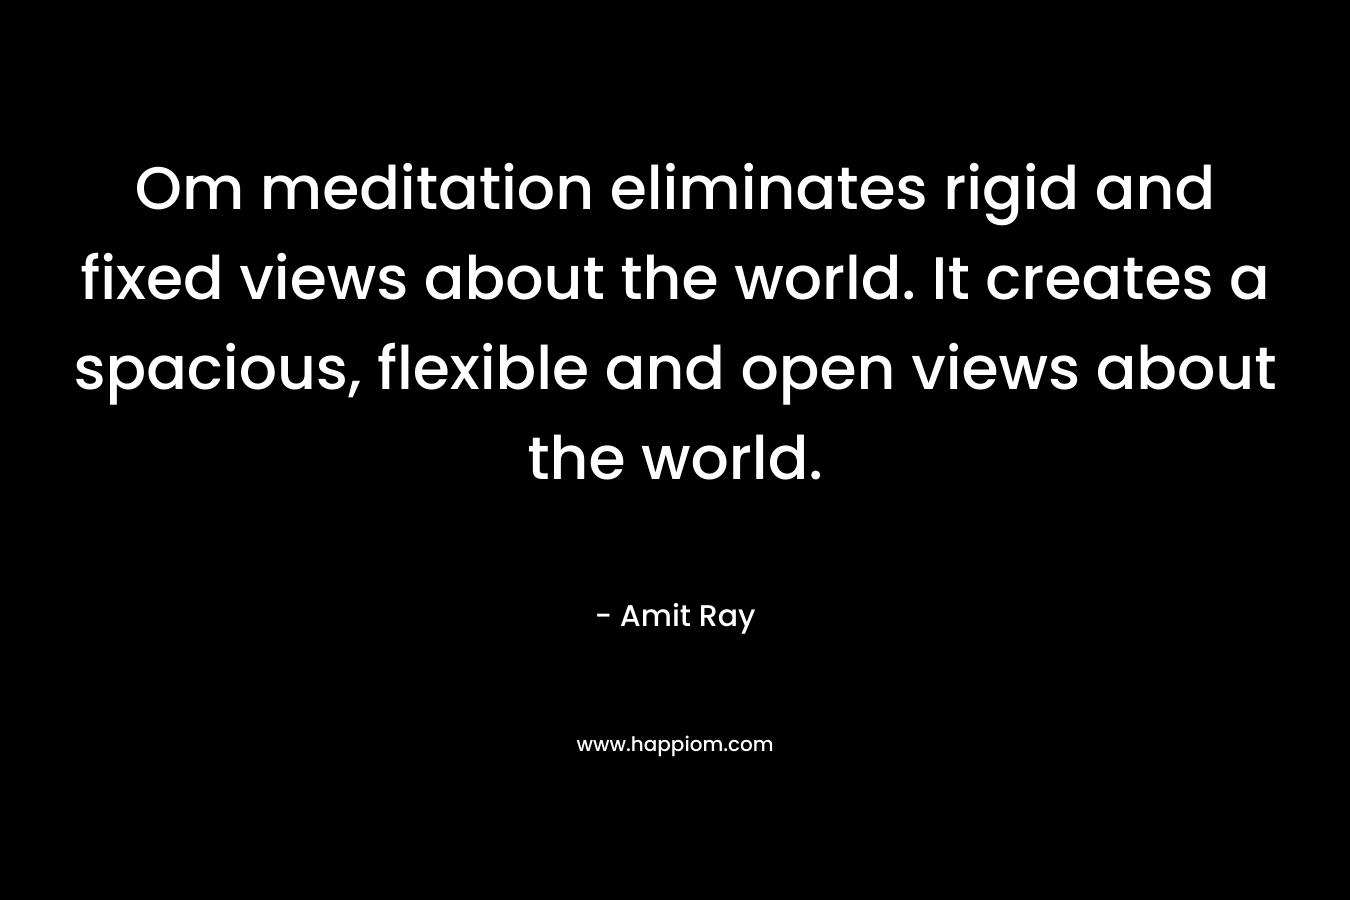 Om meditation eliminates rigid and fixed views about the world. It creates a spacious, flexible and open views about the world.